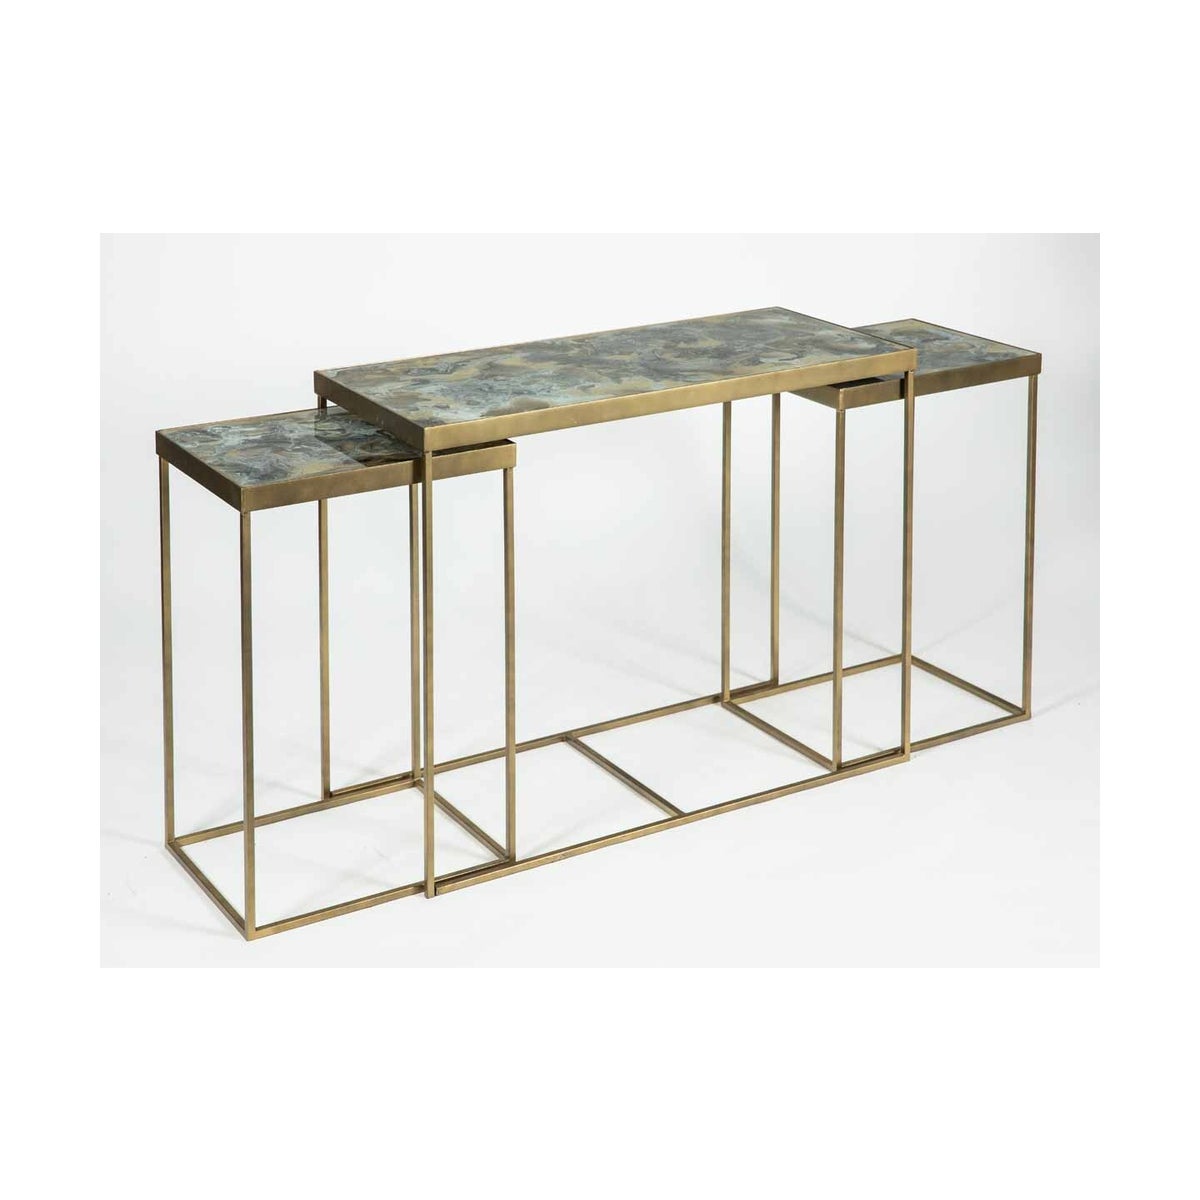 Louis Nesting Console Tables Set of 3 in Antique Brass with Glass Top in Eureka Finish